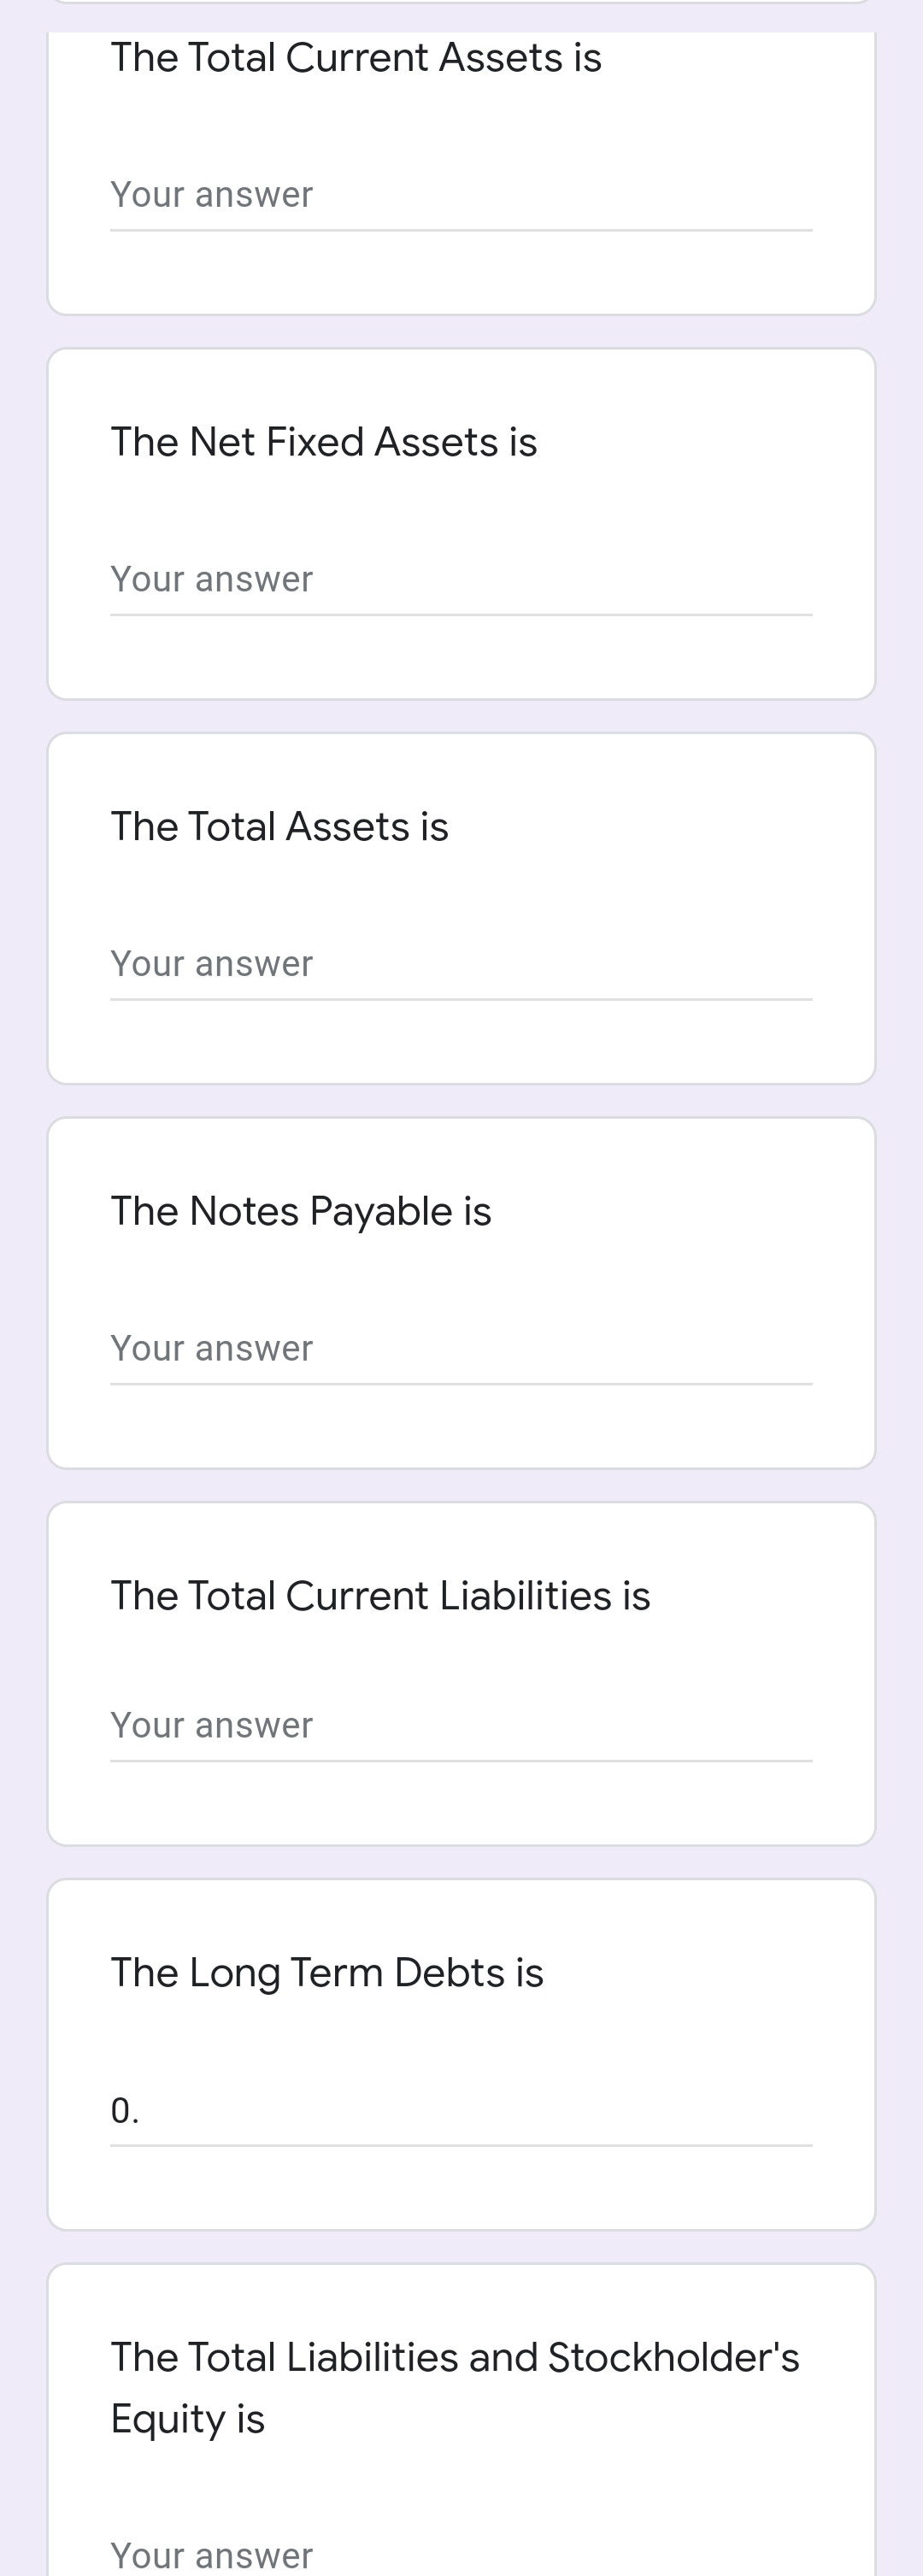 The Total Current Assets is
Your answer
The Net Fixed Assets is
Your answer
The Total Assets is
Your answer
The Notes Payable is
Your answer
The Total Current Liabilities is
Your answer
The Long Term Debts is
0.
The Total Liabilities and Stockholder's
Equity is
Your answer
